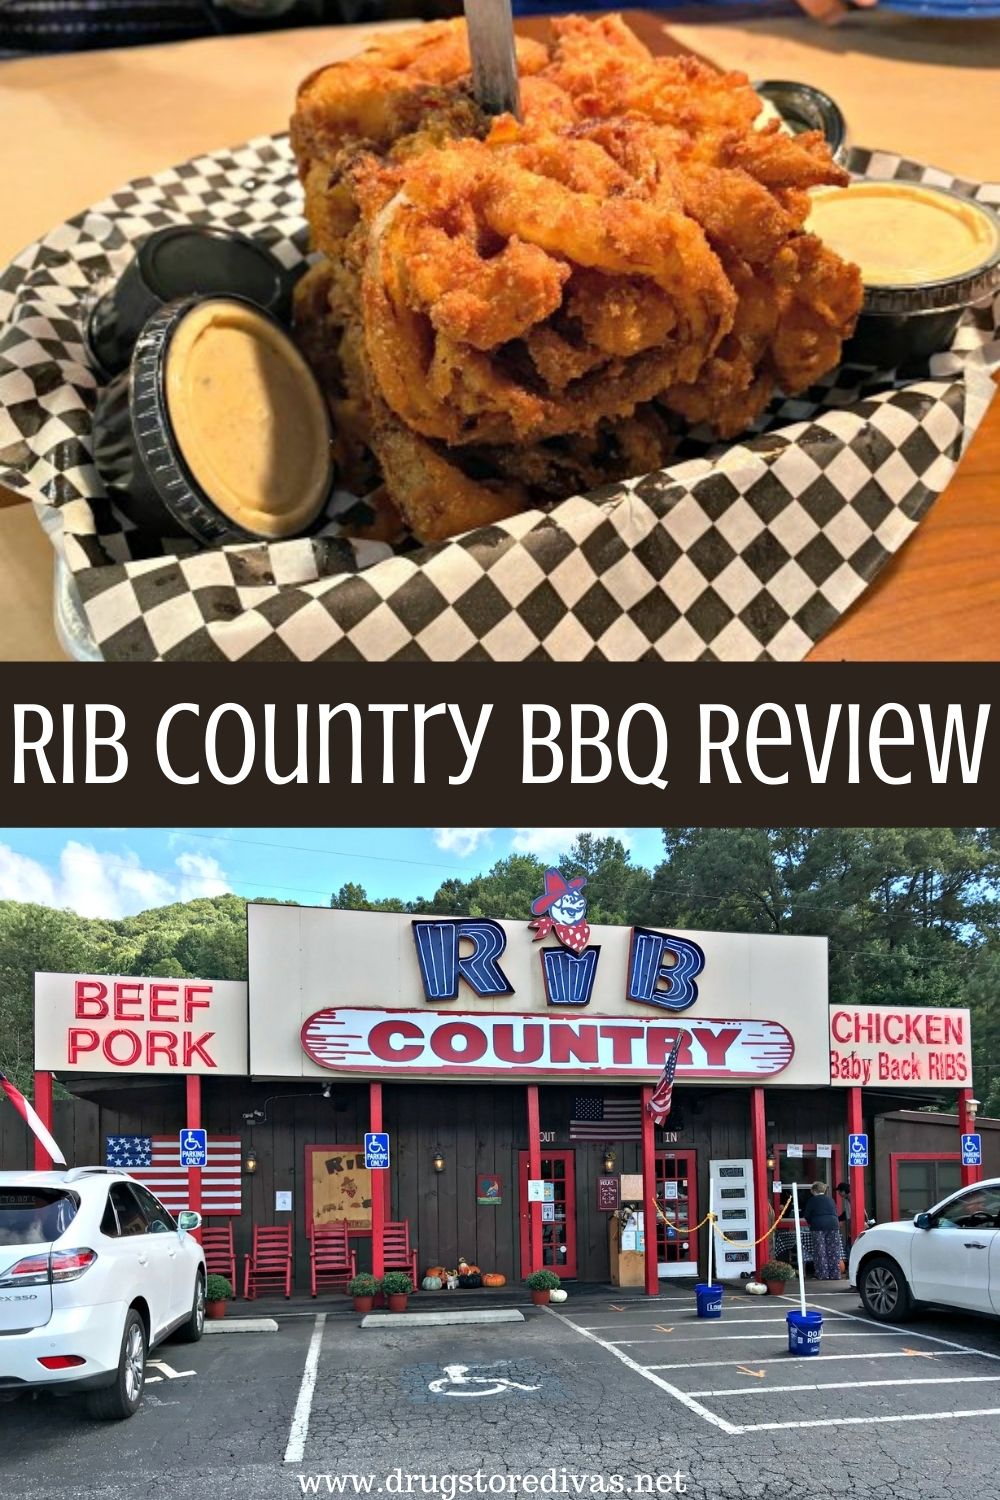 Rib Country BBQ is a family-owned barbecue restaurant across North Carolina and Georgia. Find out more in this Rib Country BBQ review.